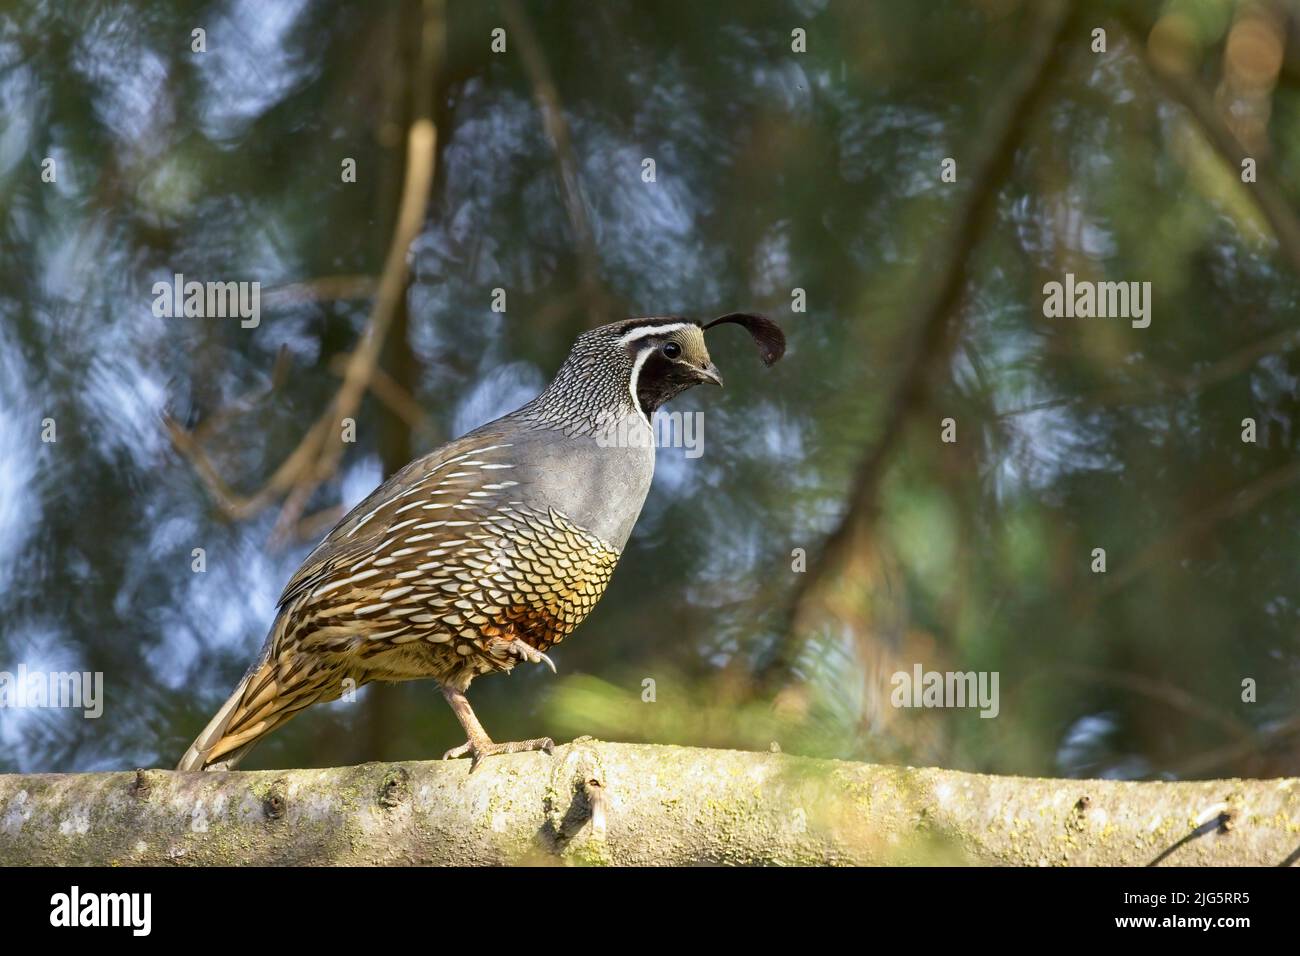 A male quail is walking on a tree branch in Rathdrum, Idaho. Stock Photo